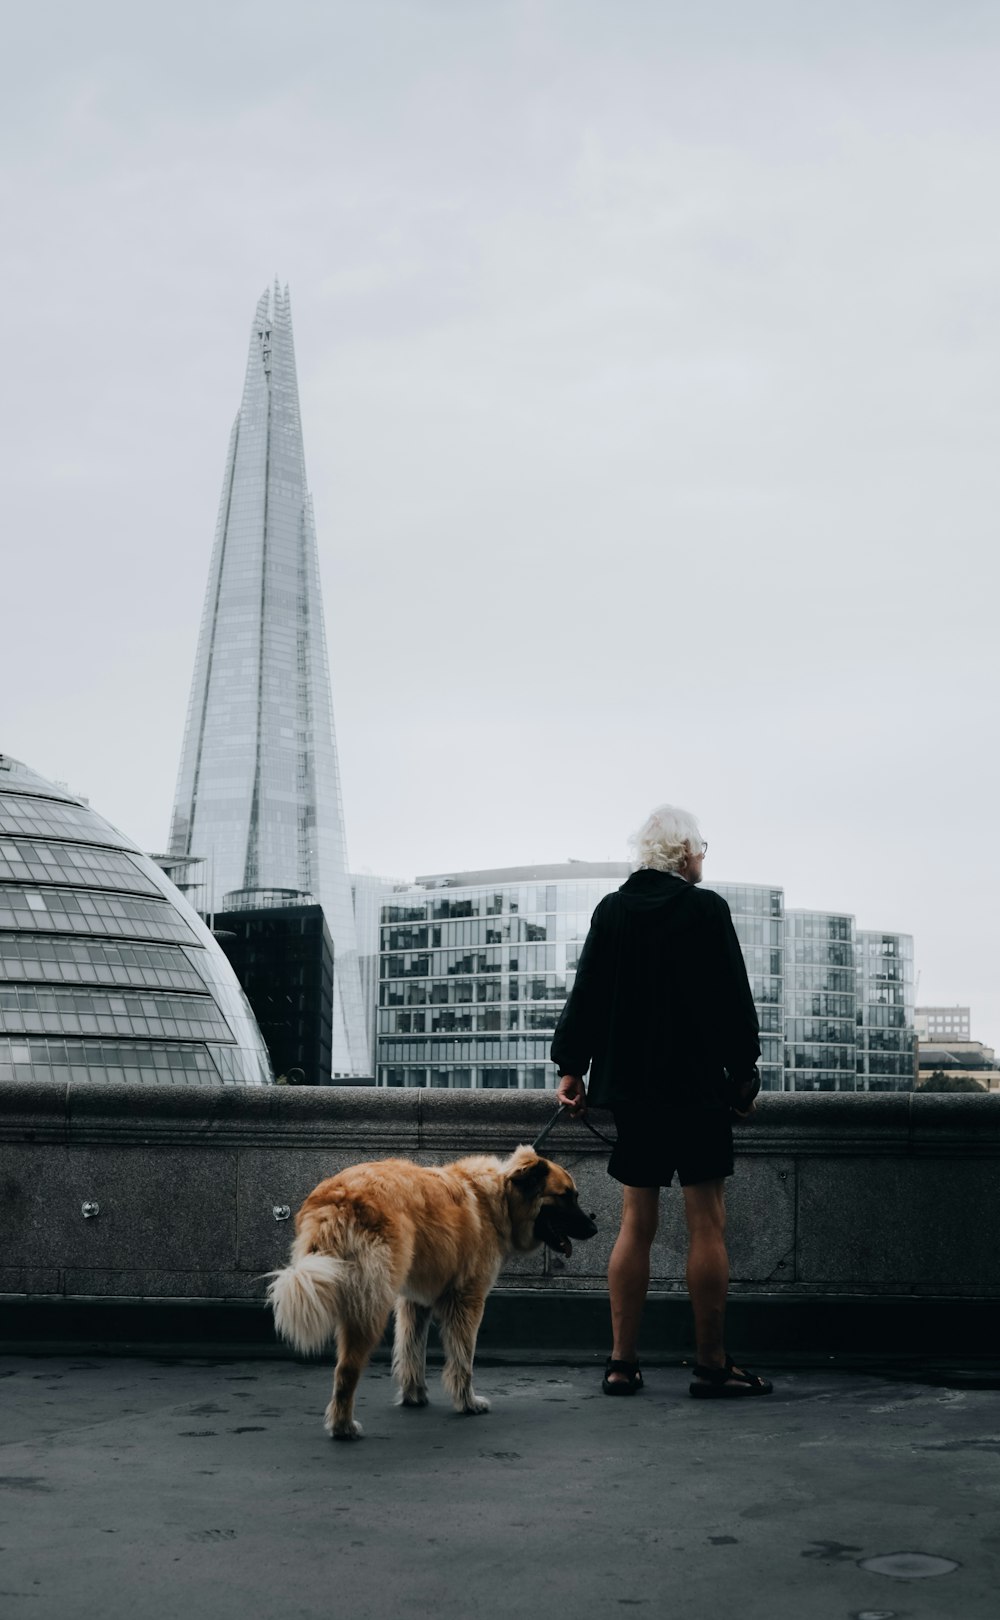 a person and a dog on a bridge